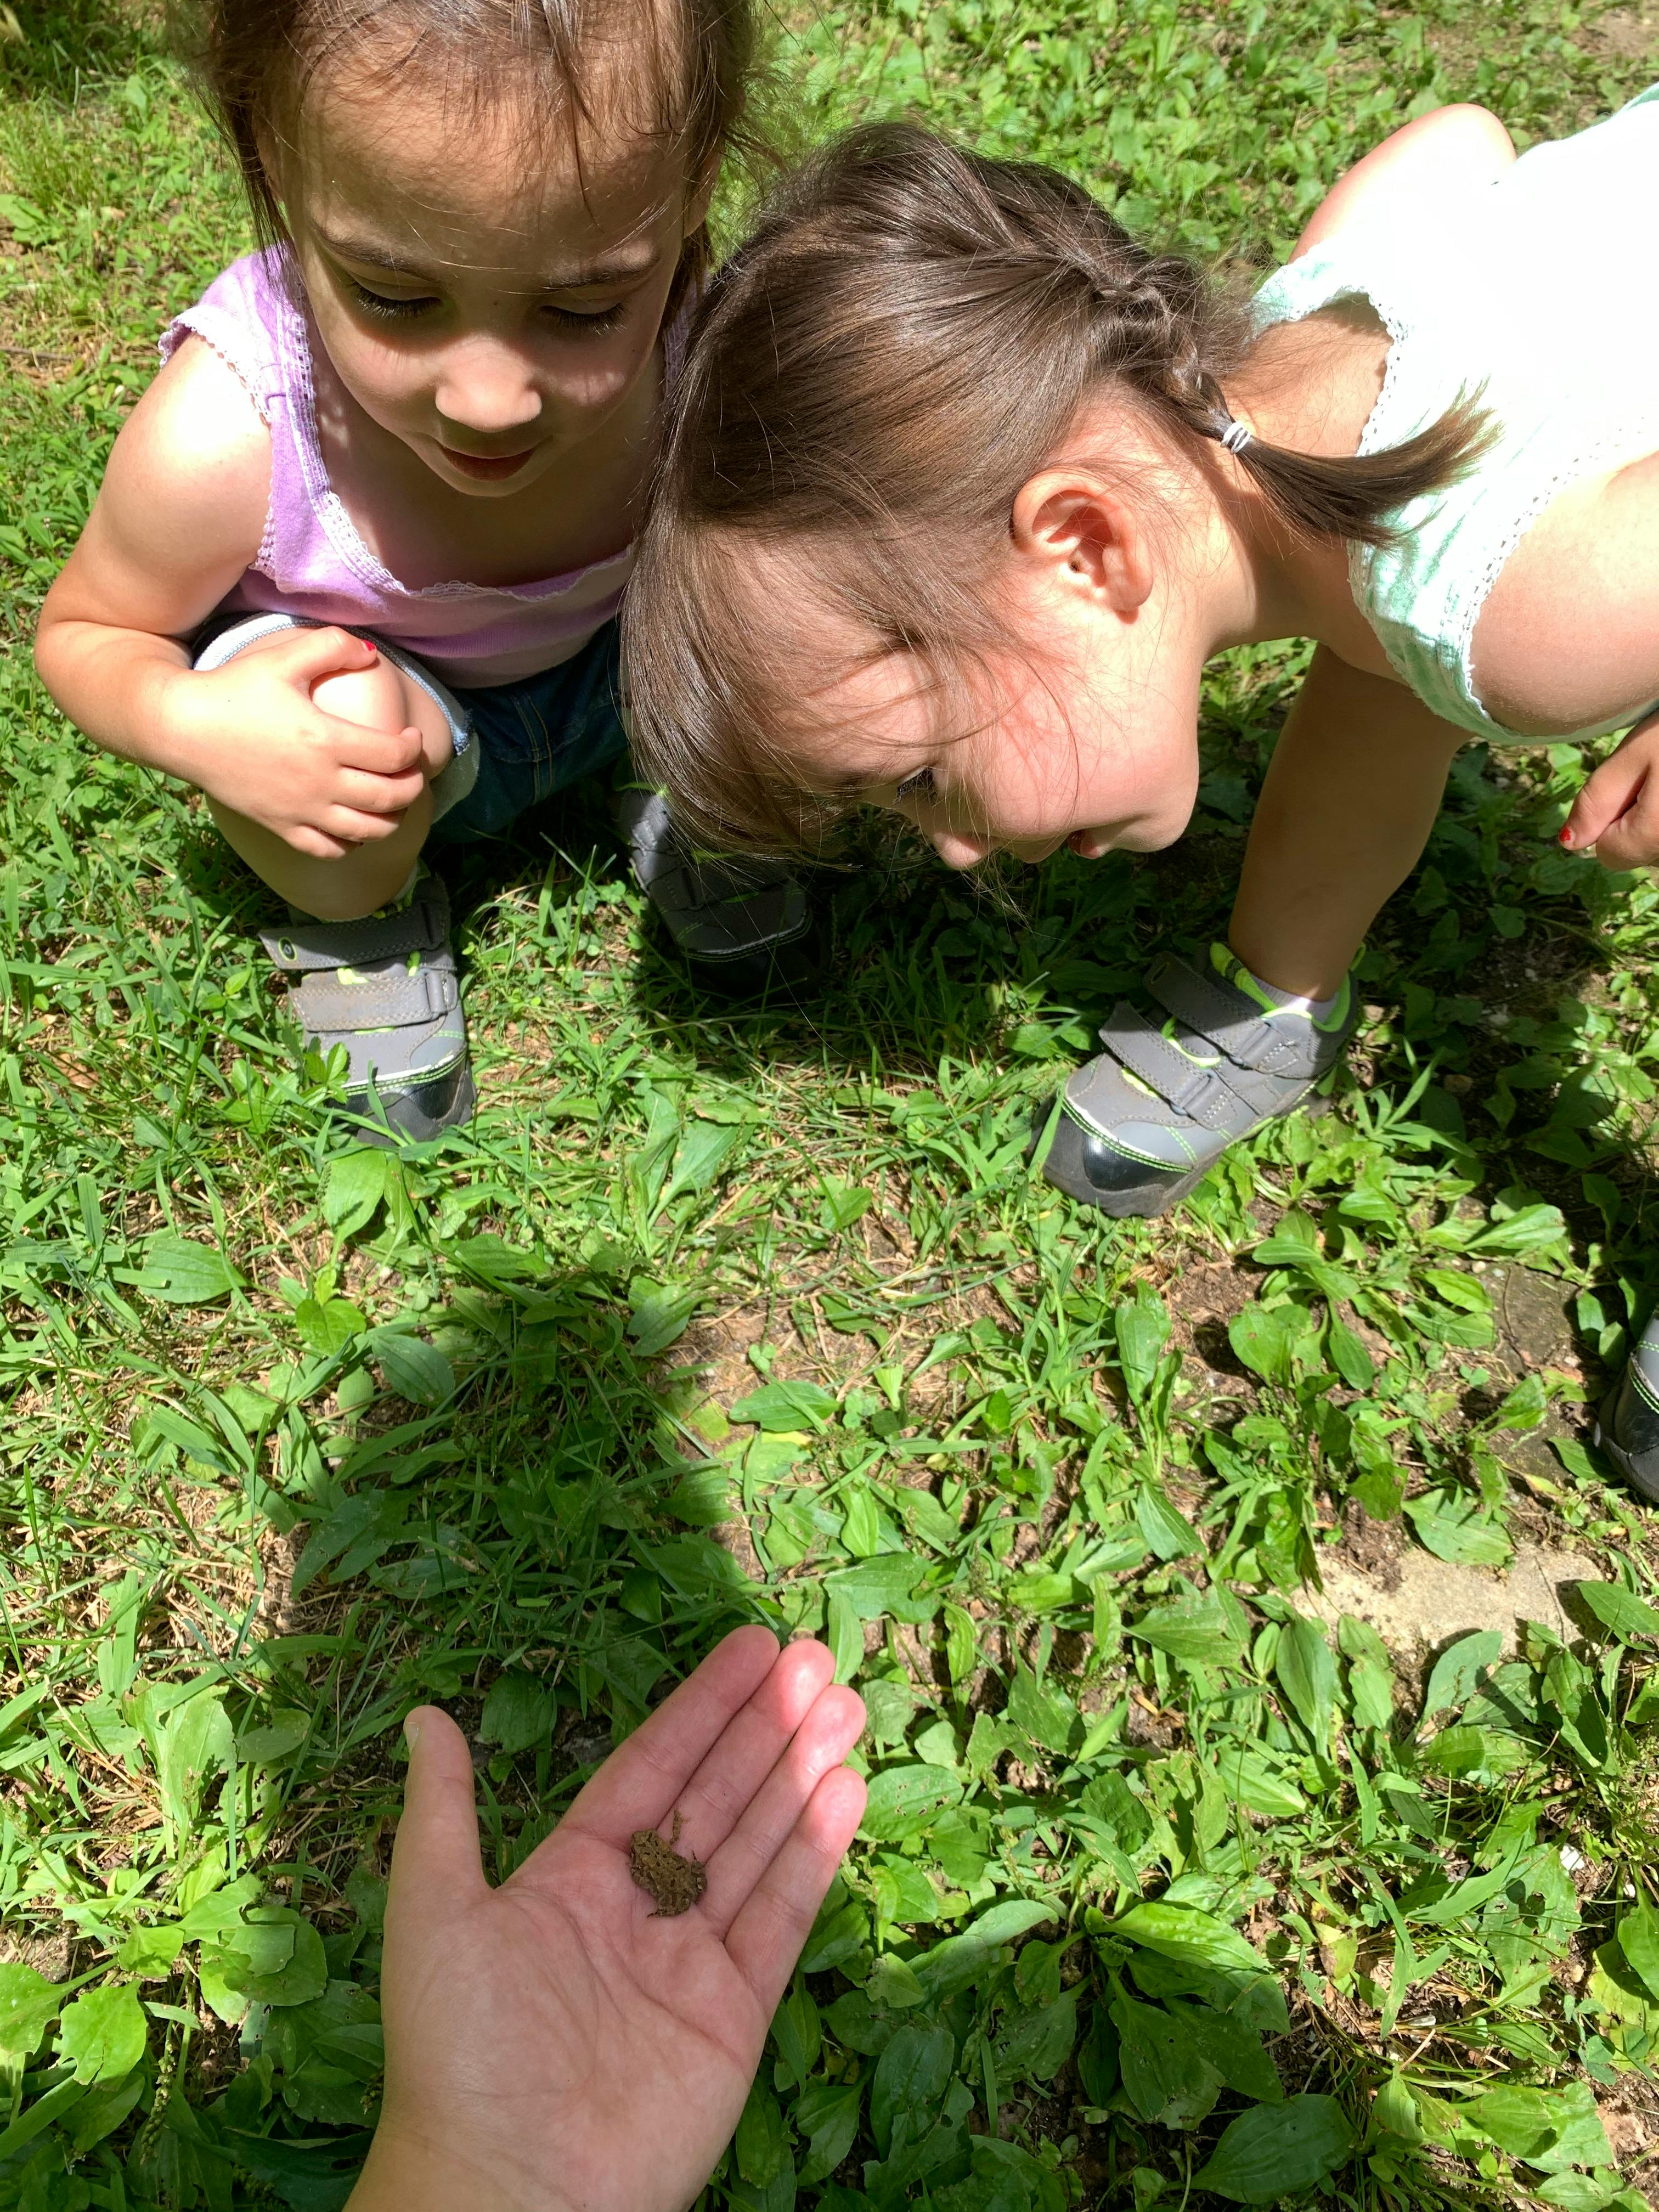 Two little girls lean forward to look at a tiny frog held in an outstretched hand